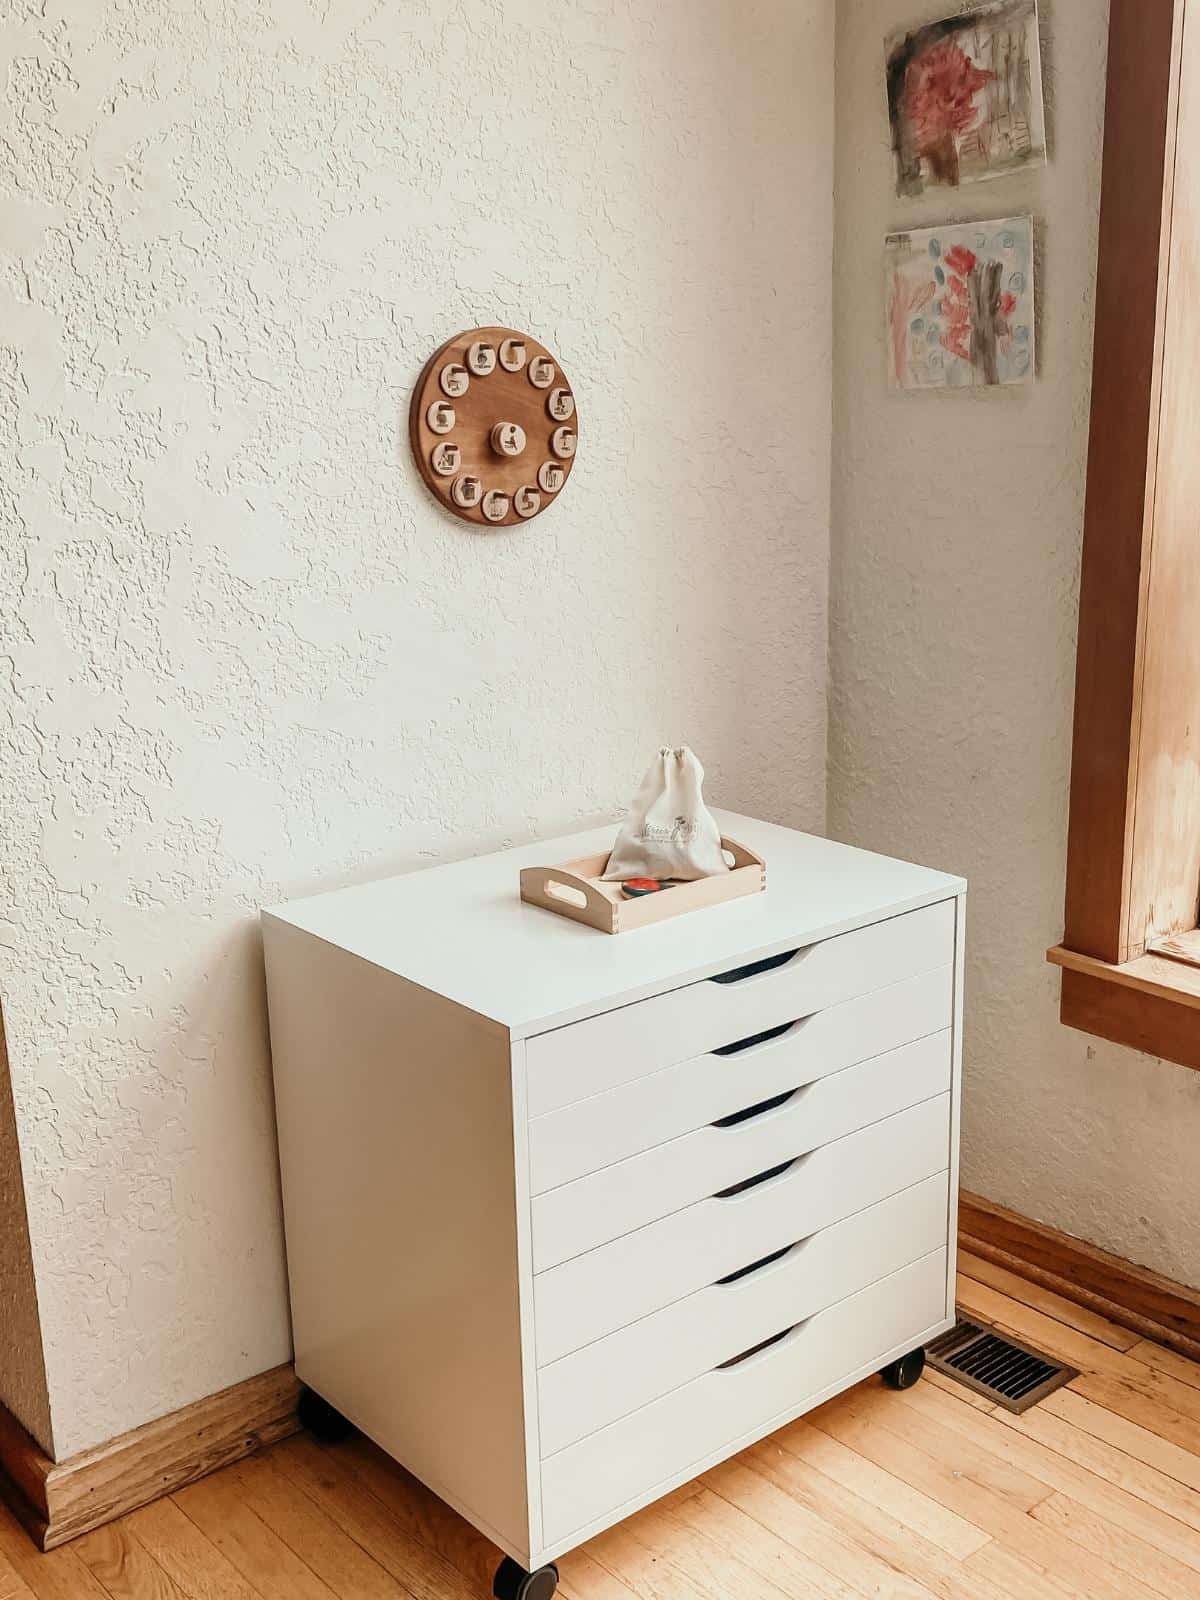 an art cabinet with art activity tray on top in a corner of a home.  There is a wooden daily schedule and watercolor paintings on canvas hanging on the wall.